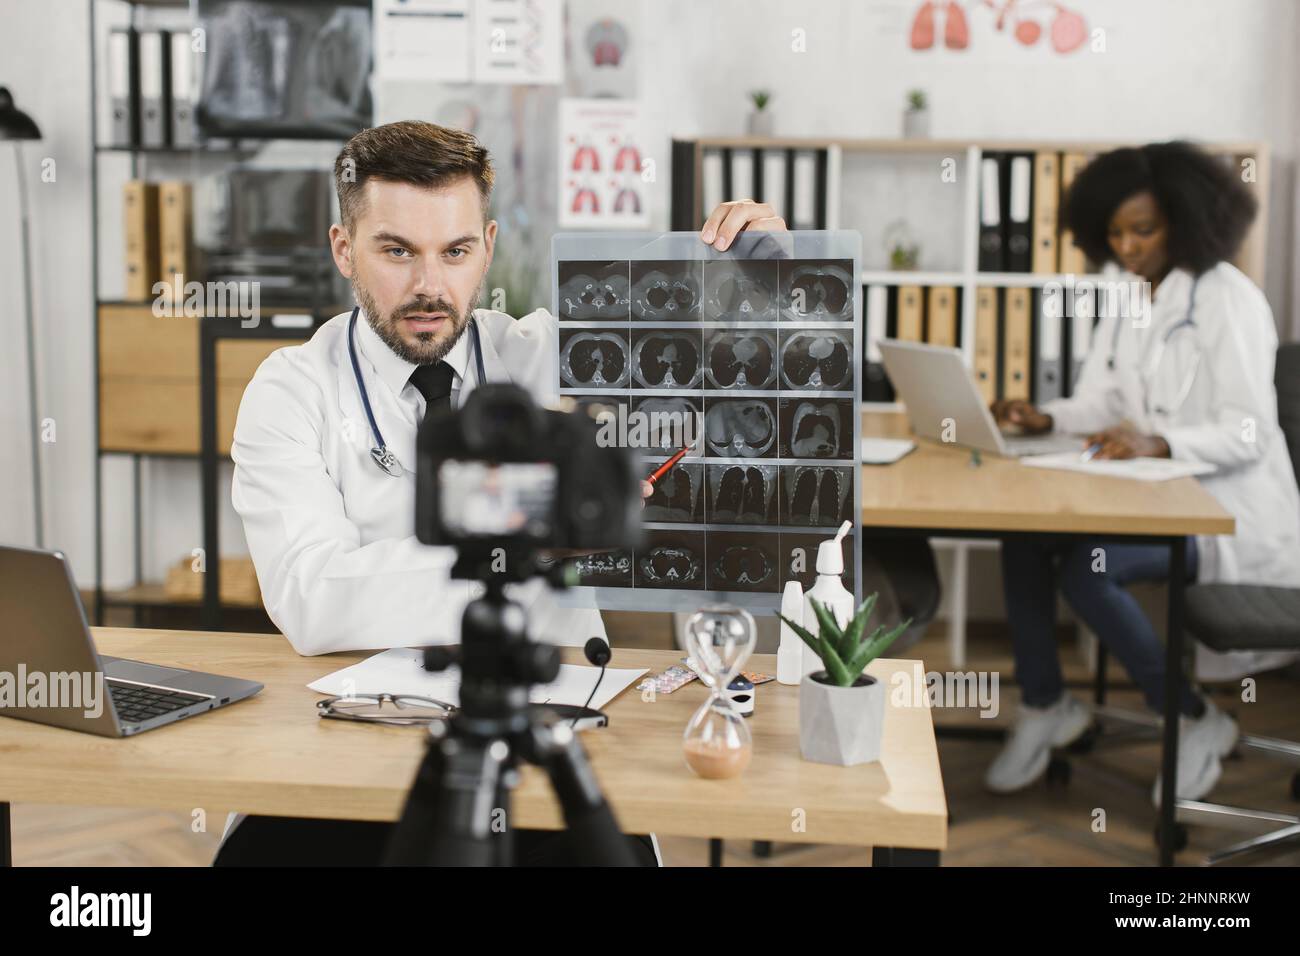 Caucasian medical specialist with x ray in hands talking and gesturing while filming new video for his blog. Concept of people, technology and health care. Stock Photo